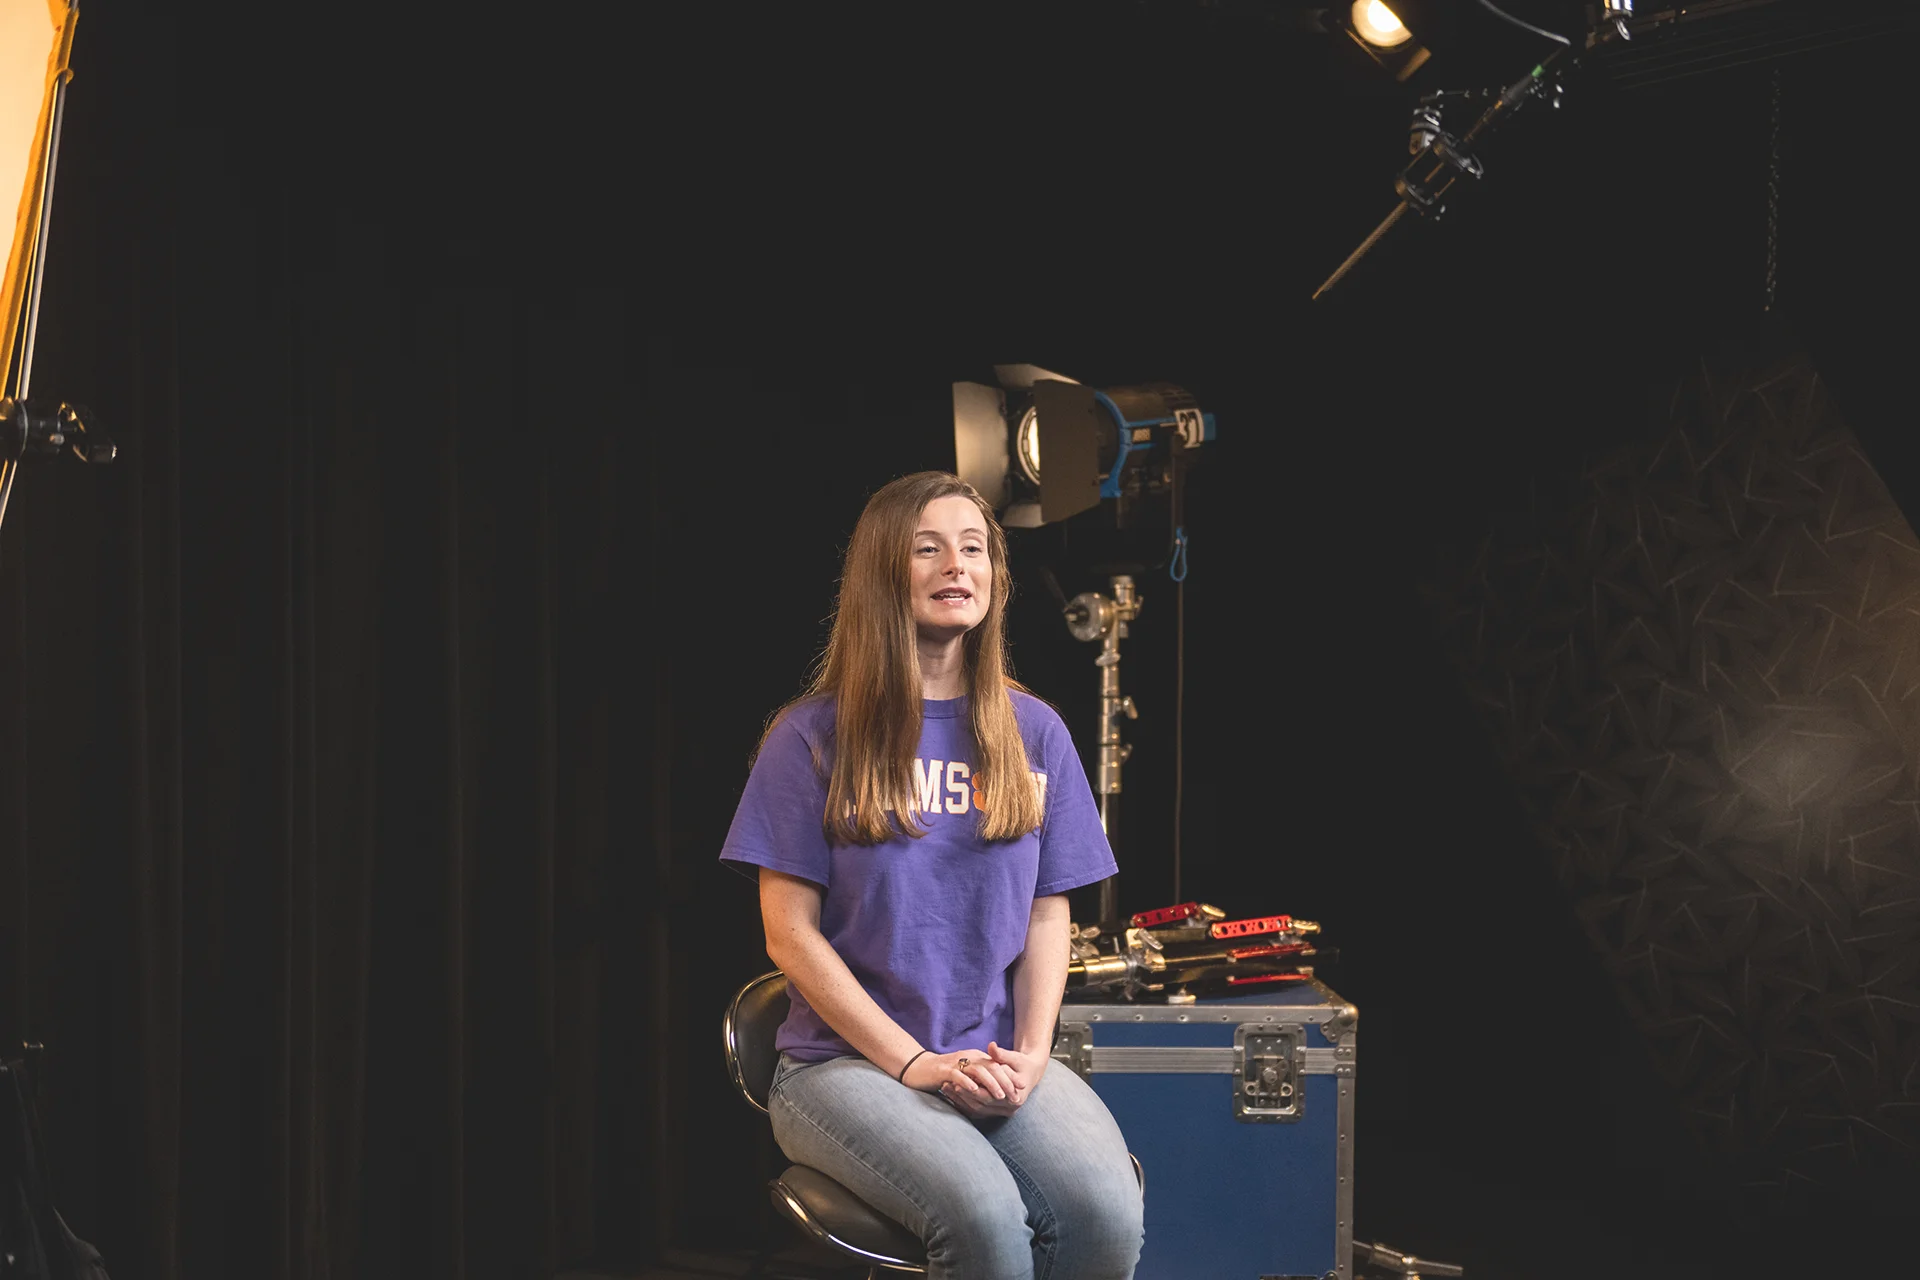 Preview image of student Erin Griffin, wearing a purple Clemson shirt and sitting in a studio. An arrow indicating a movie will play when clicked appears in the middle of the image.